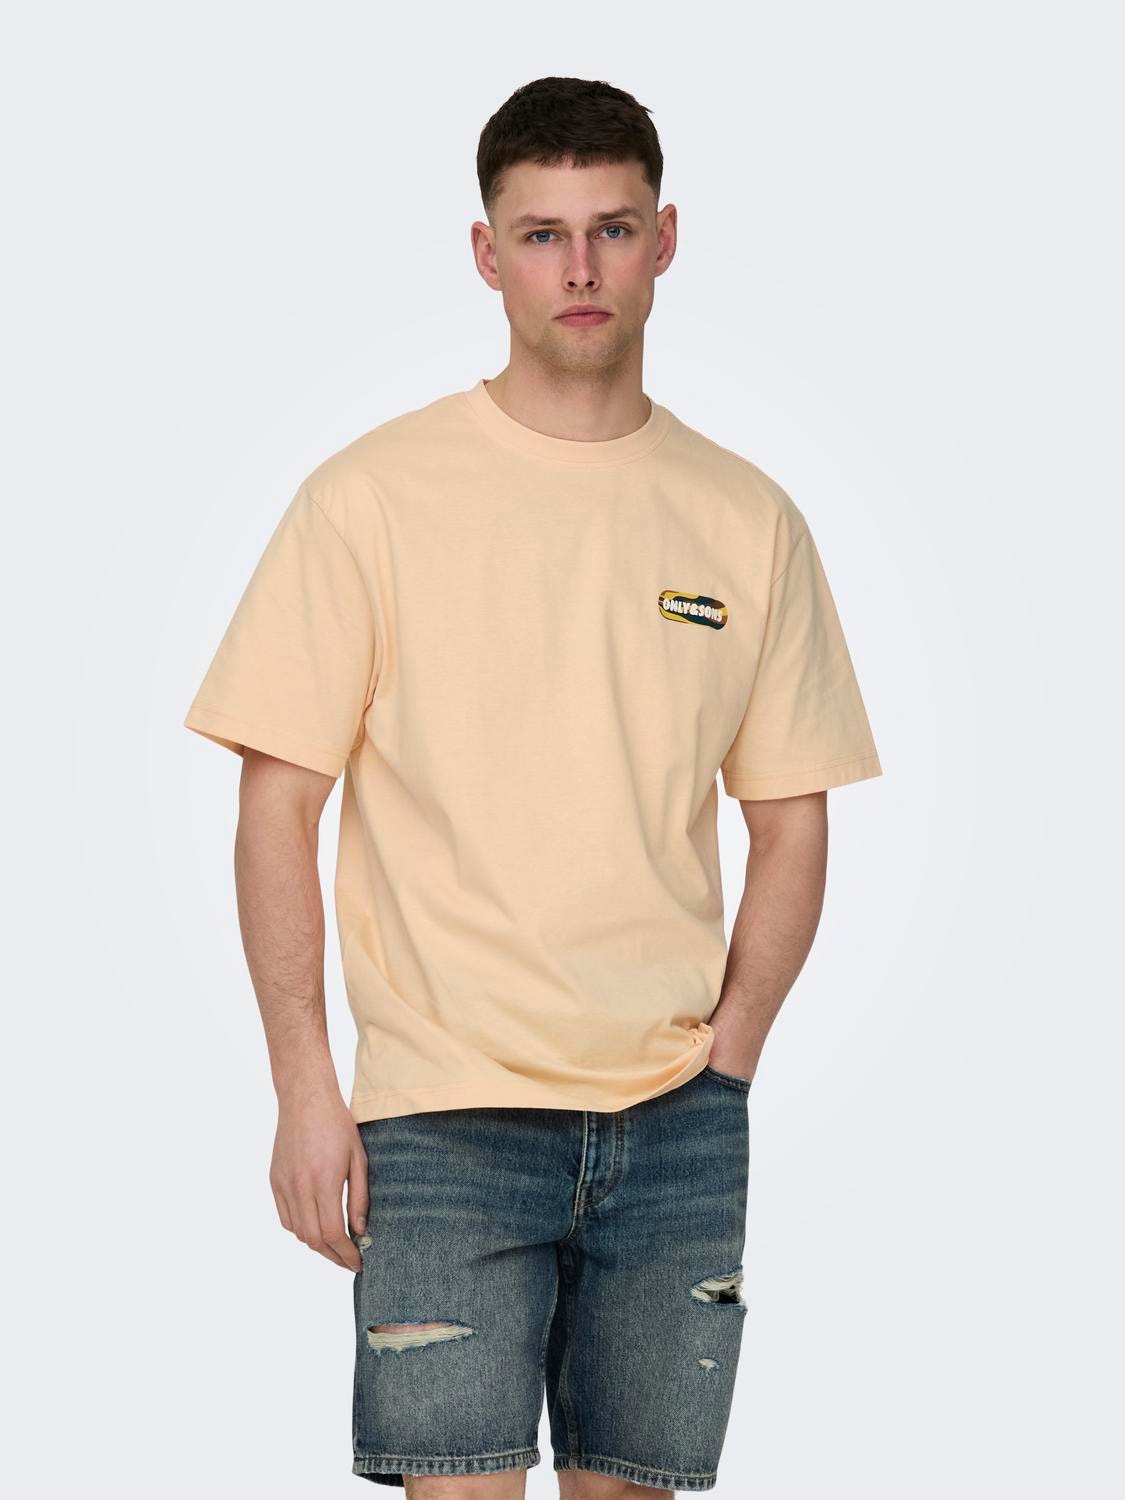 ONLY & SONS o-hals t-shirt -Creampuff - 22029091